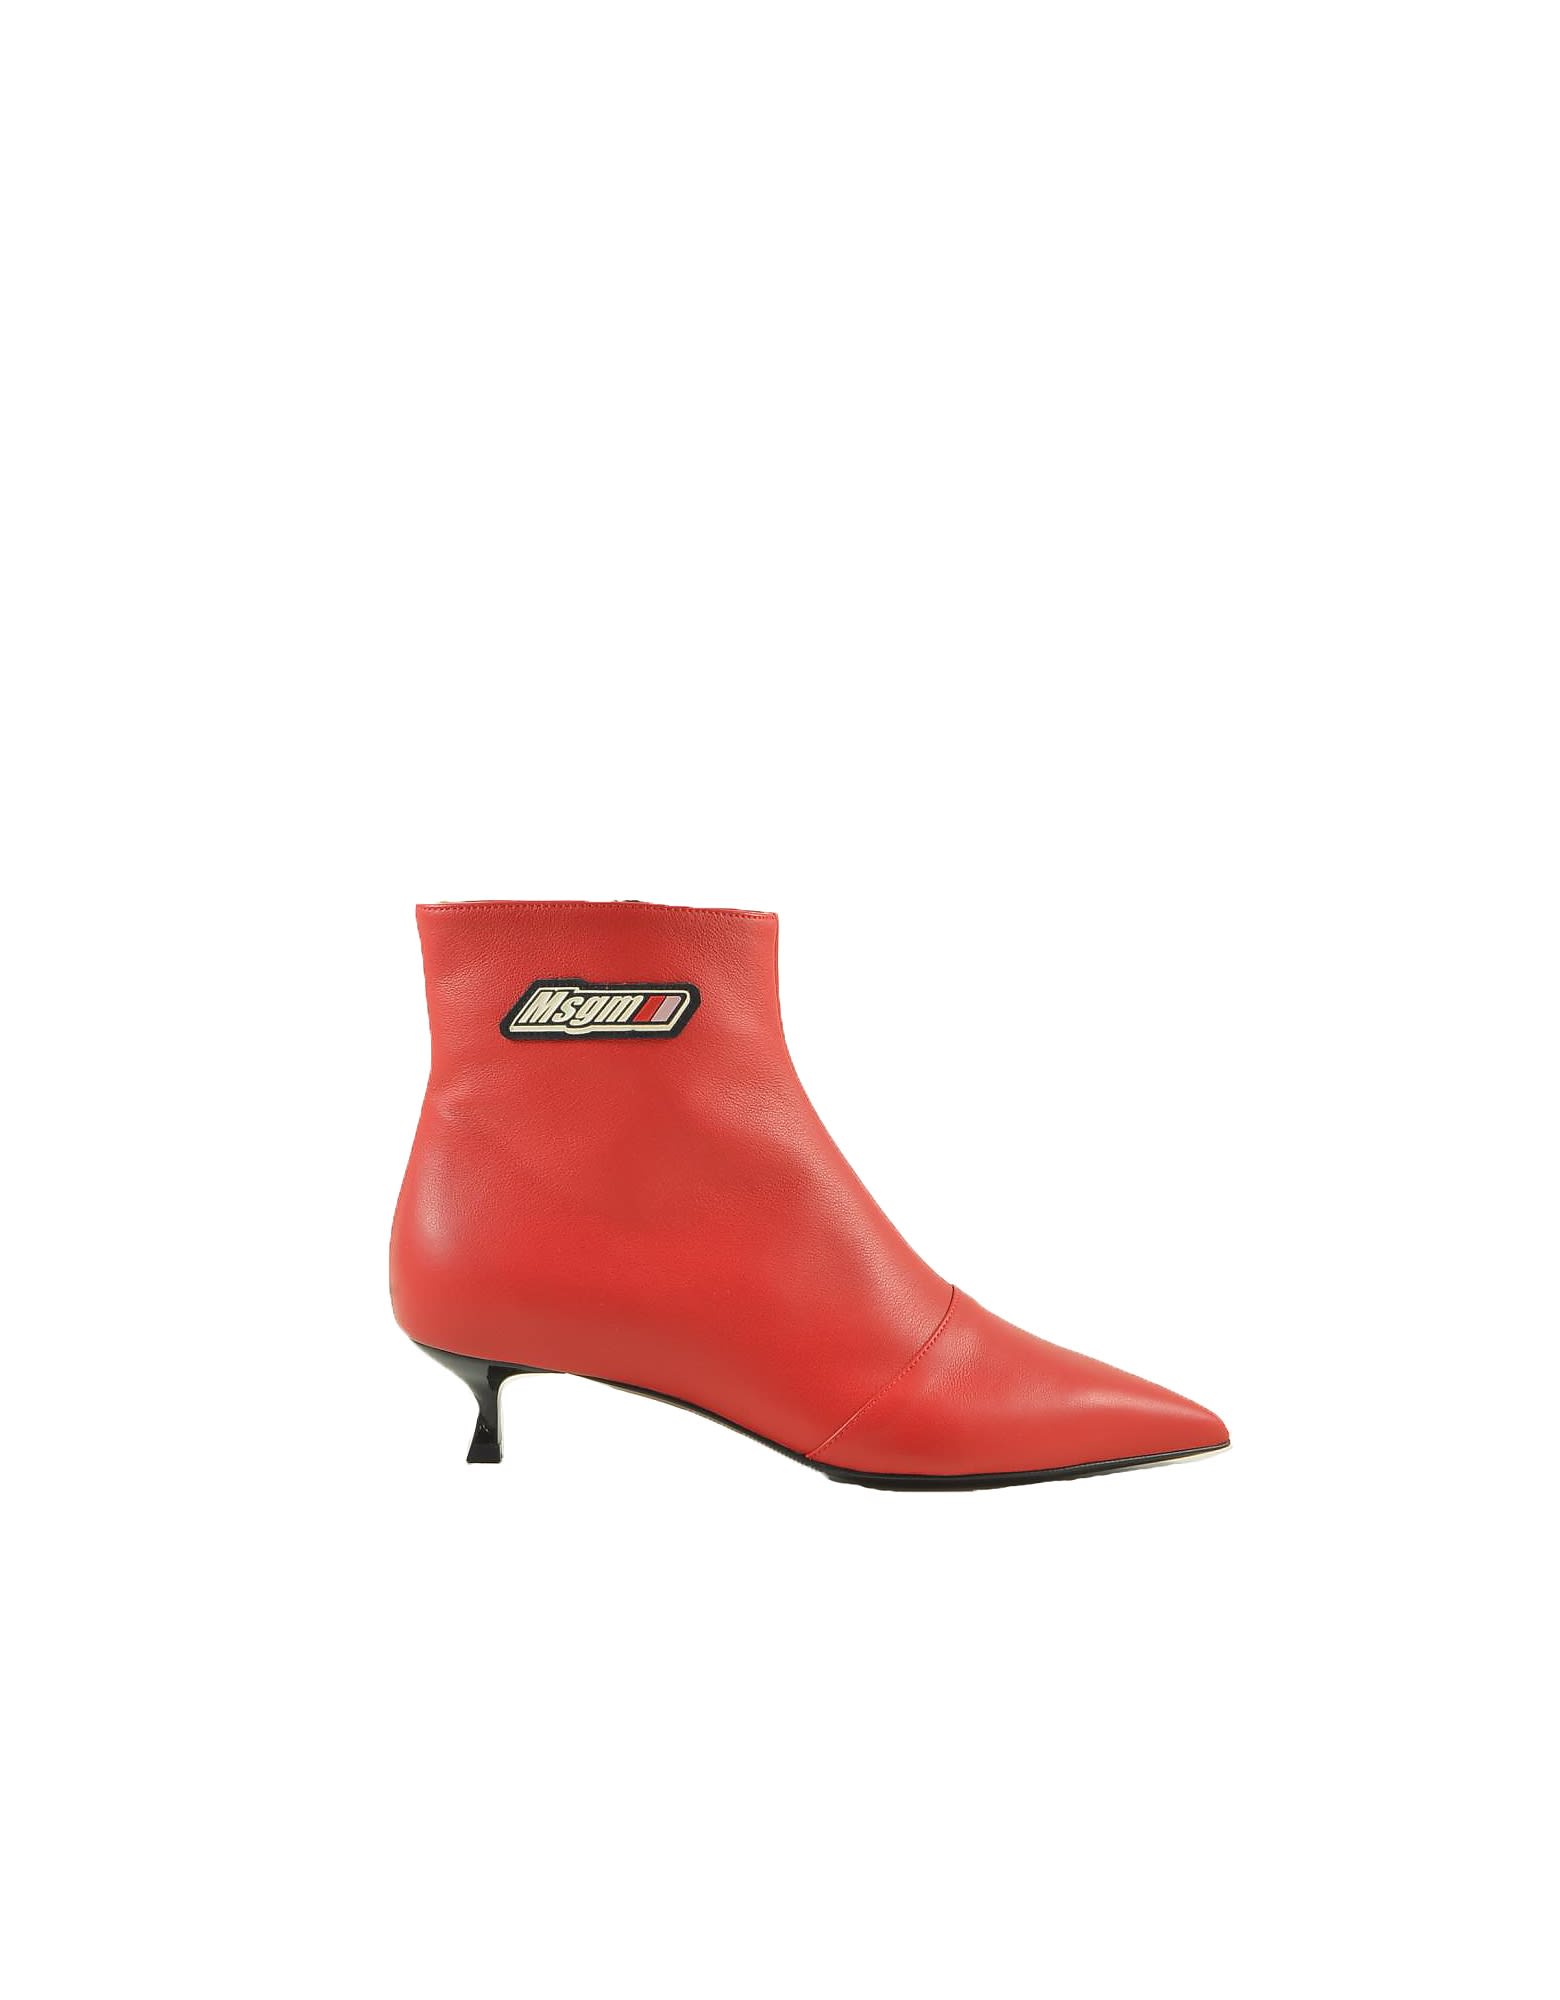 Msgm Red Leather Stiletto Booties